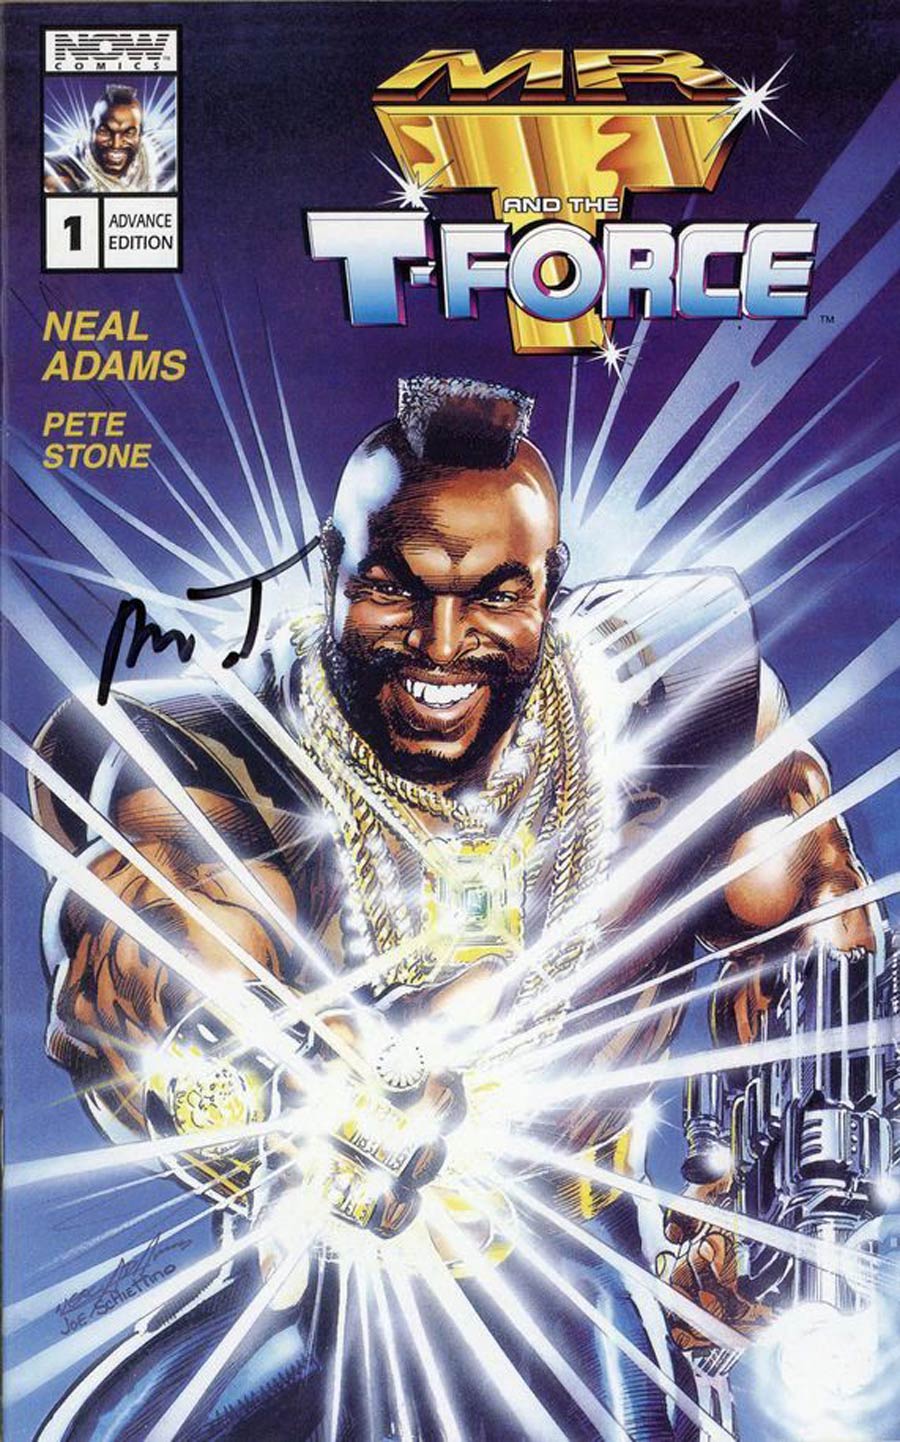 Mr T And The T-Force #1 Cover E Advanced Edition